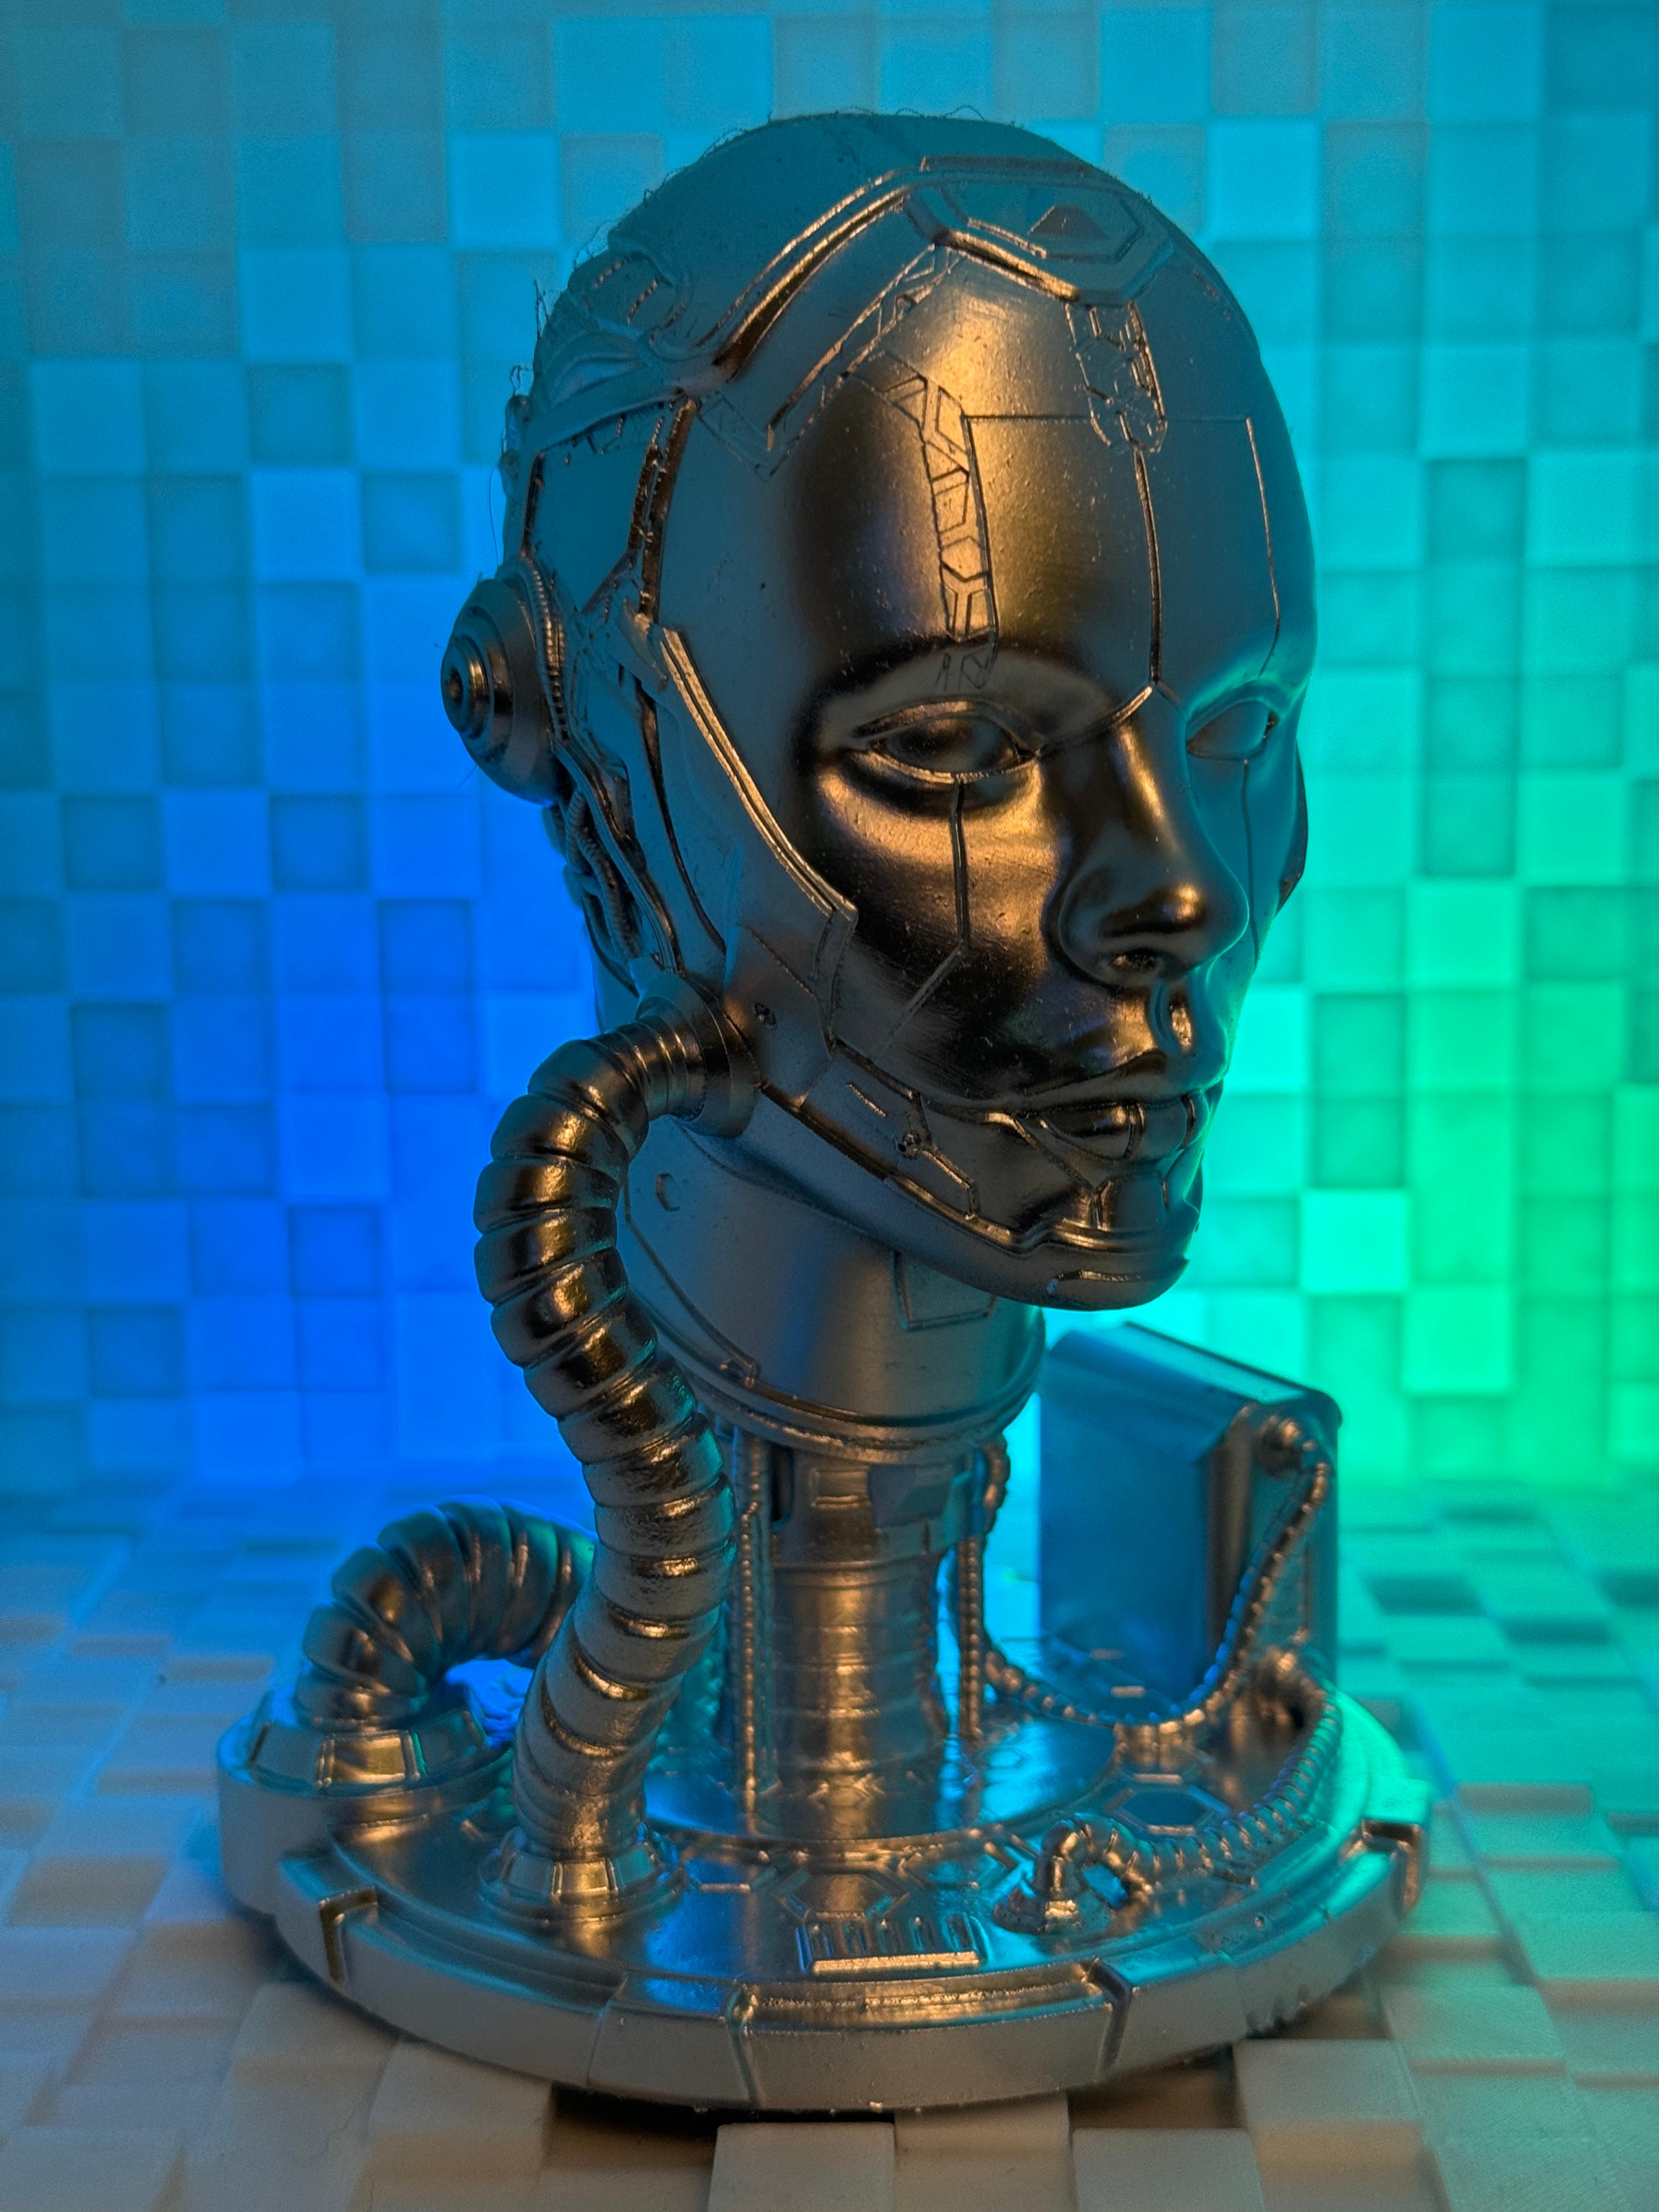 Cyborg (Pre Supported) 3d model